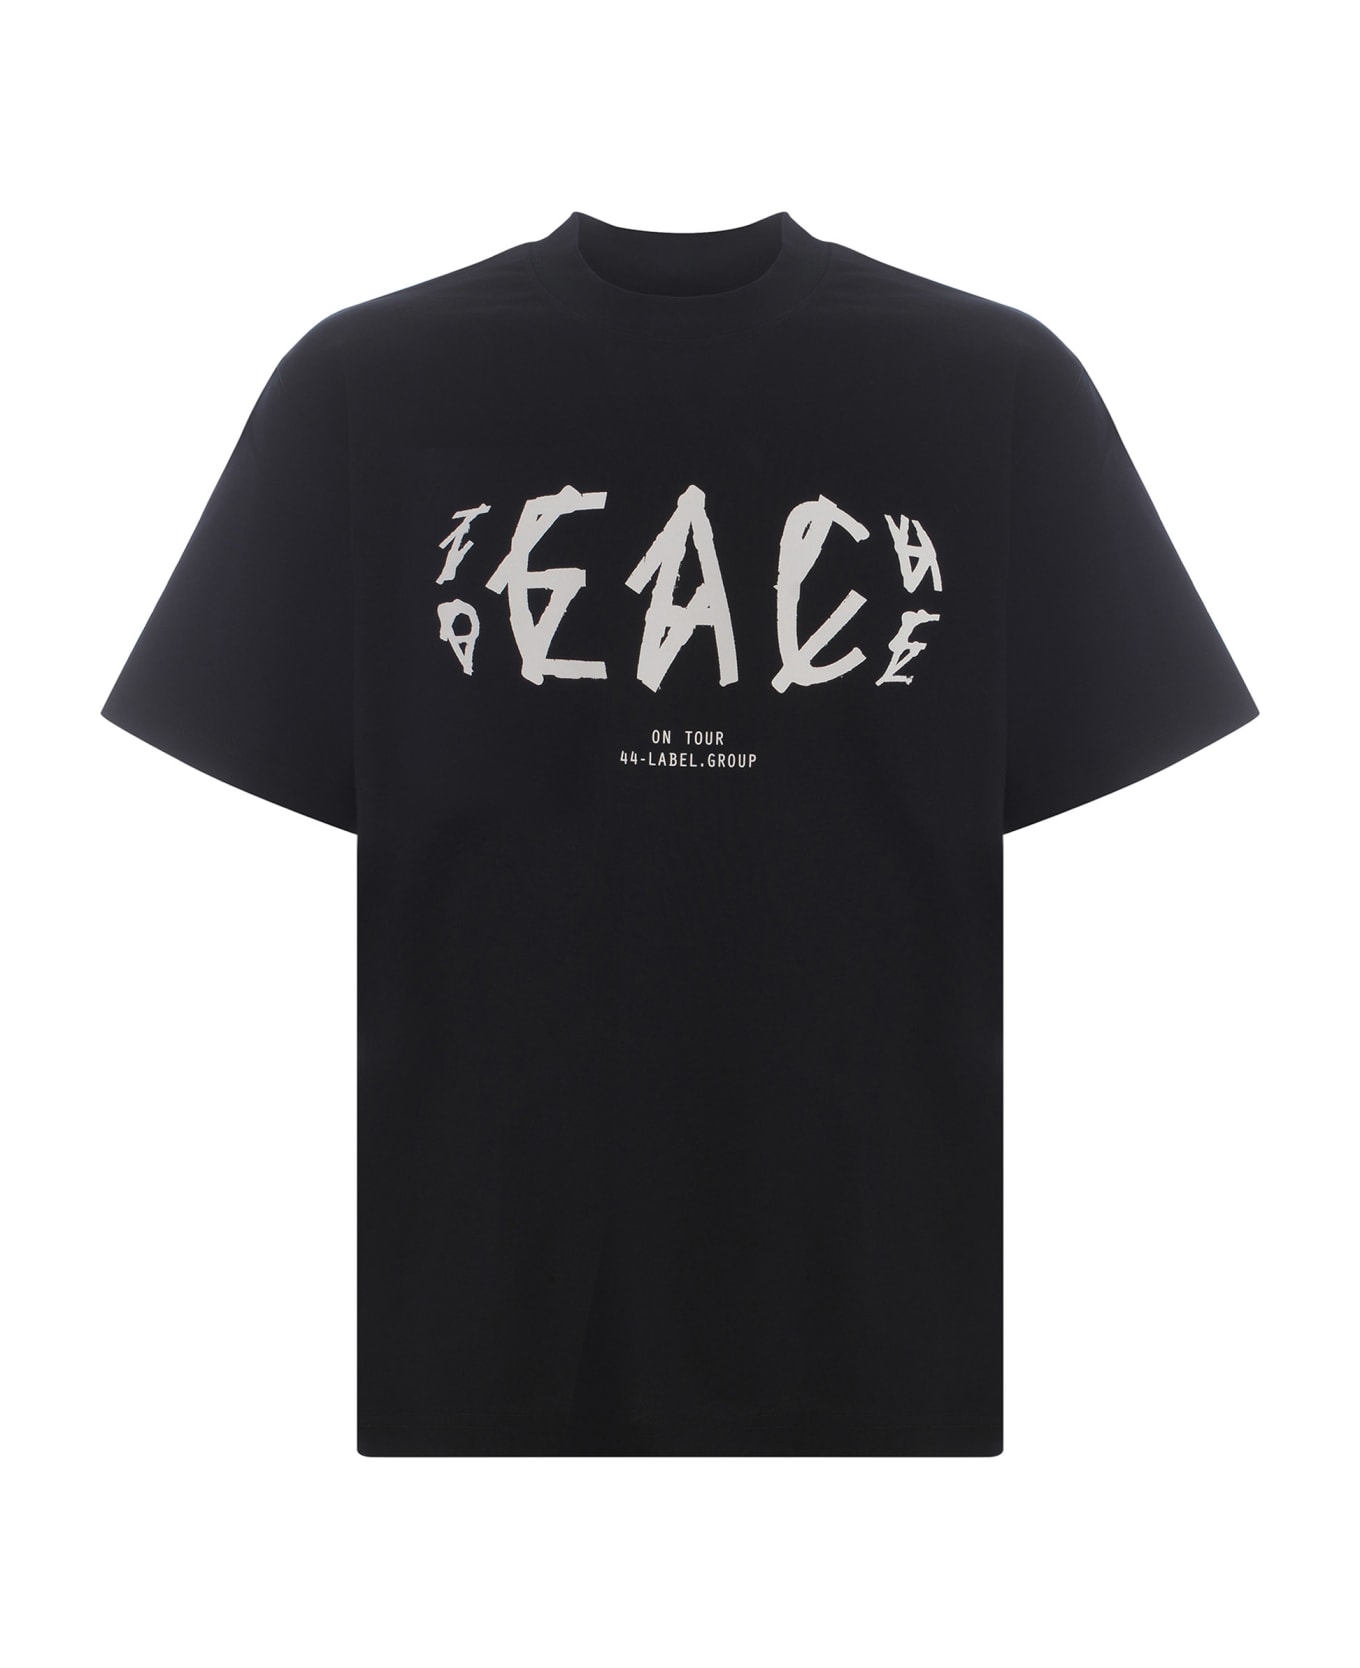 44 Label Group T-shirt 44label Group "peace" Made Of Cotton - Nero